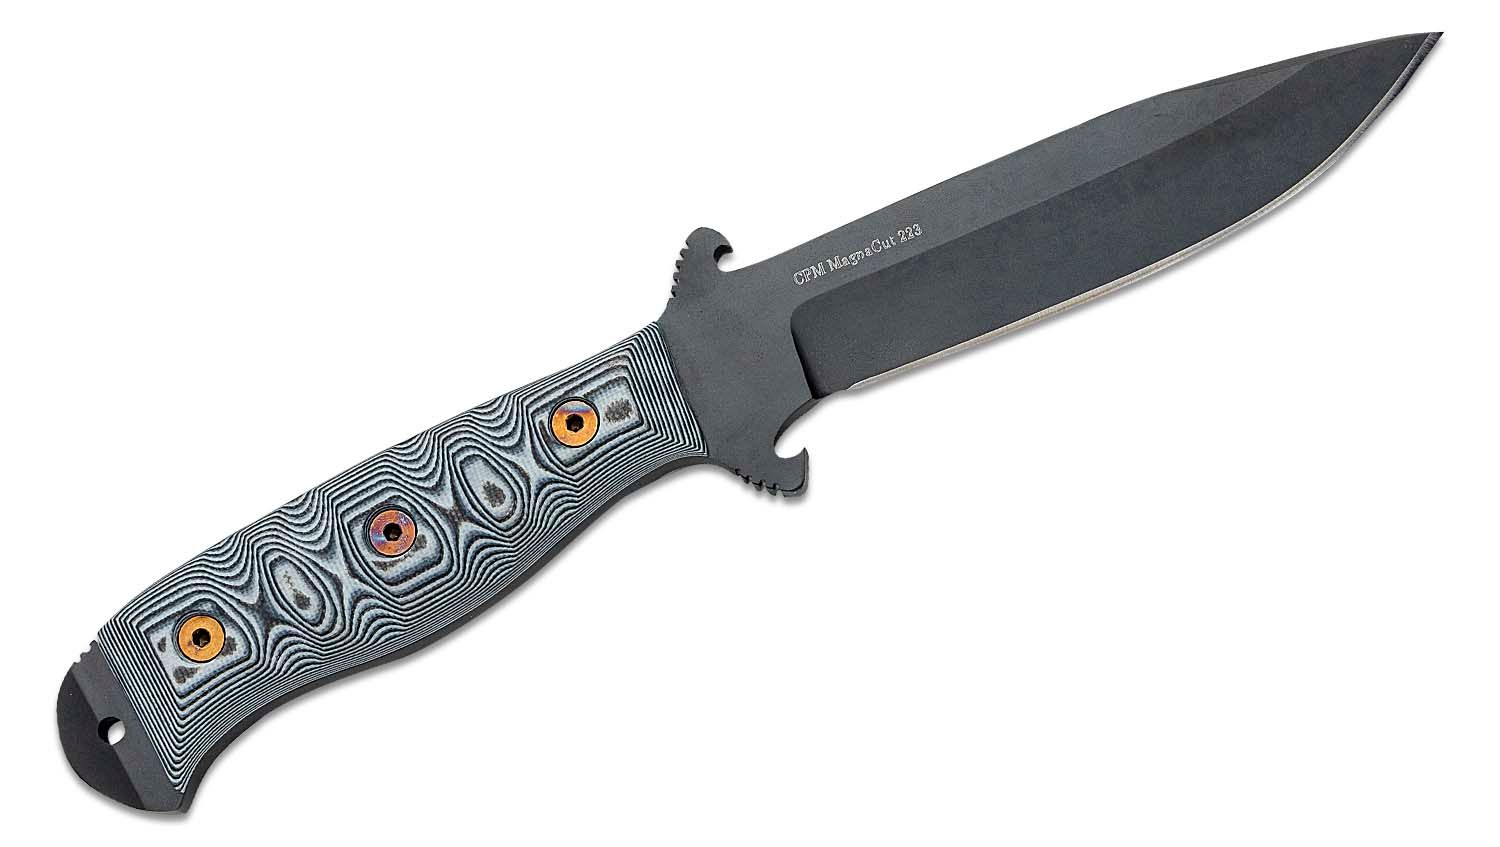 RAZOR BLADE KNIFE - Roberts Consolidated